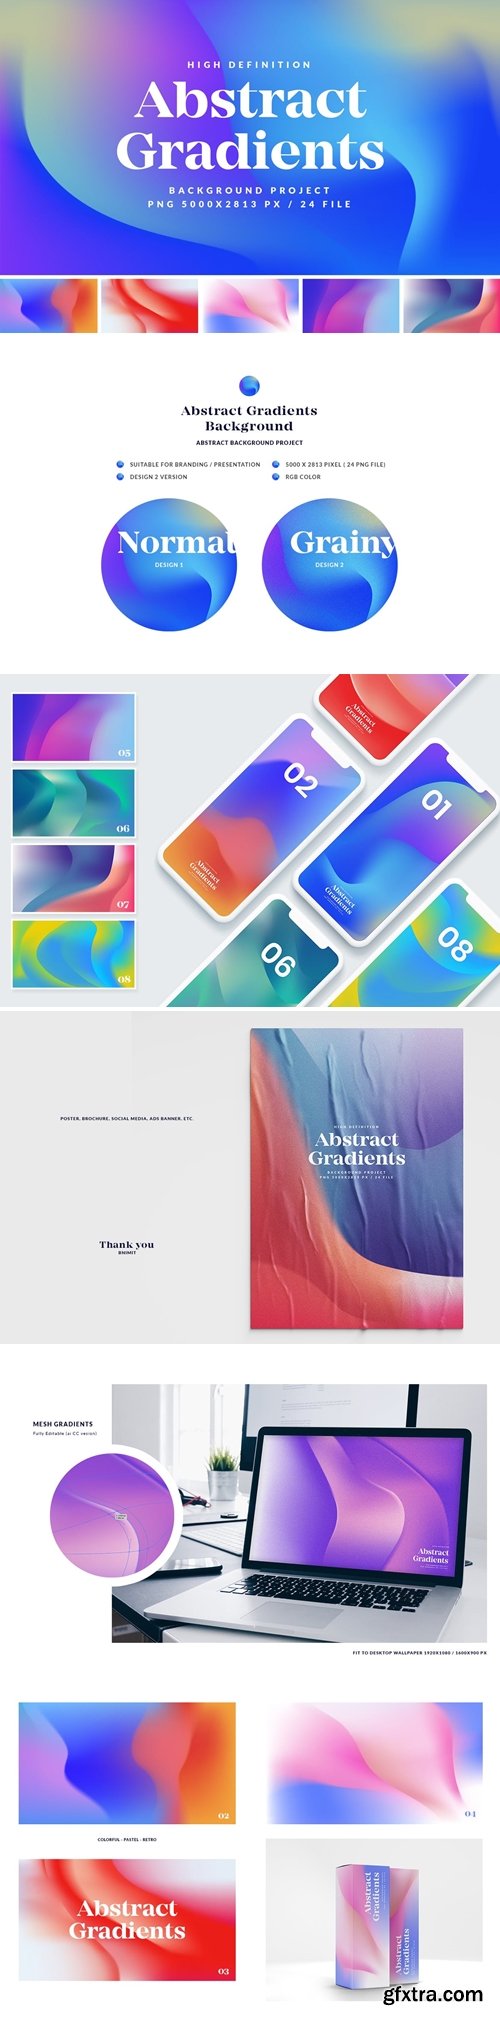 Abstract Gradients Background